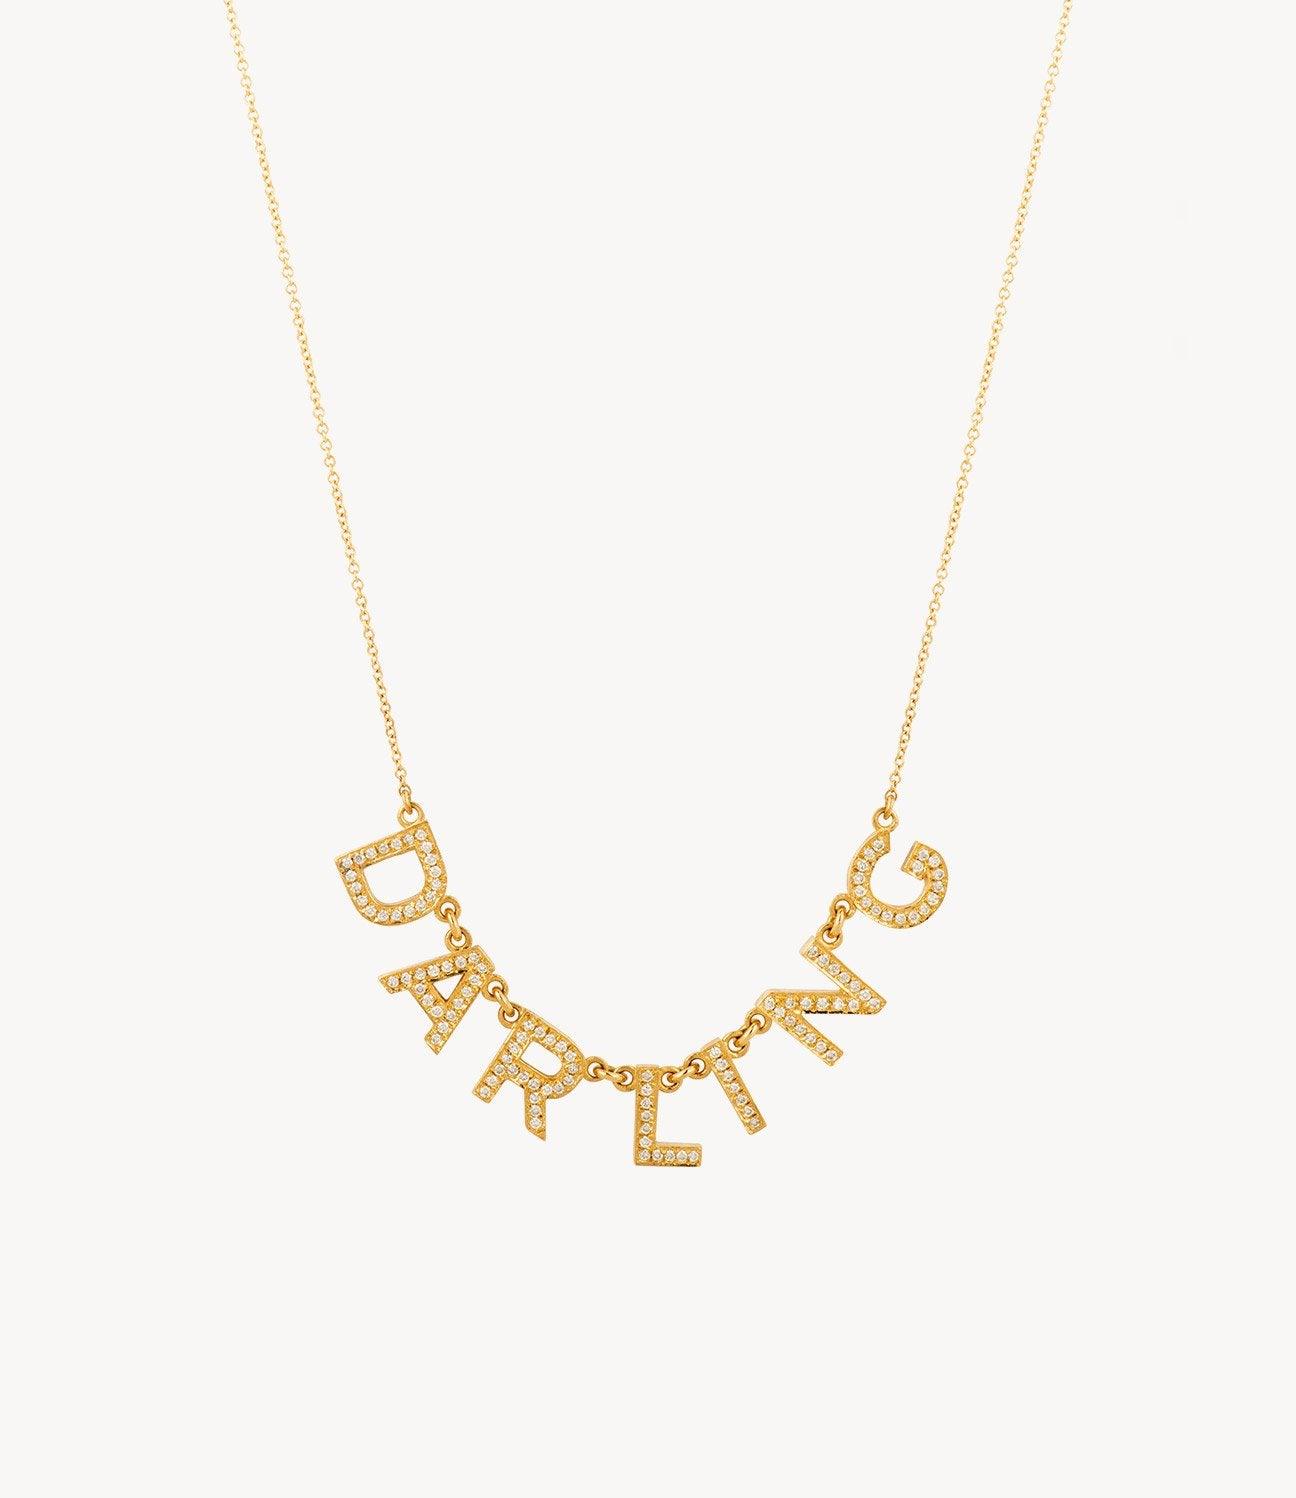 Oh Darling Diamond Necklace - Roxanne First